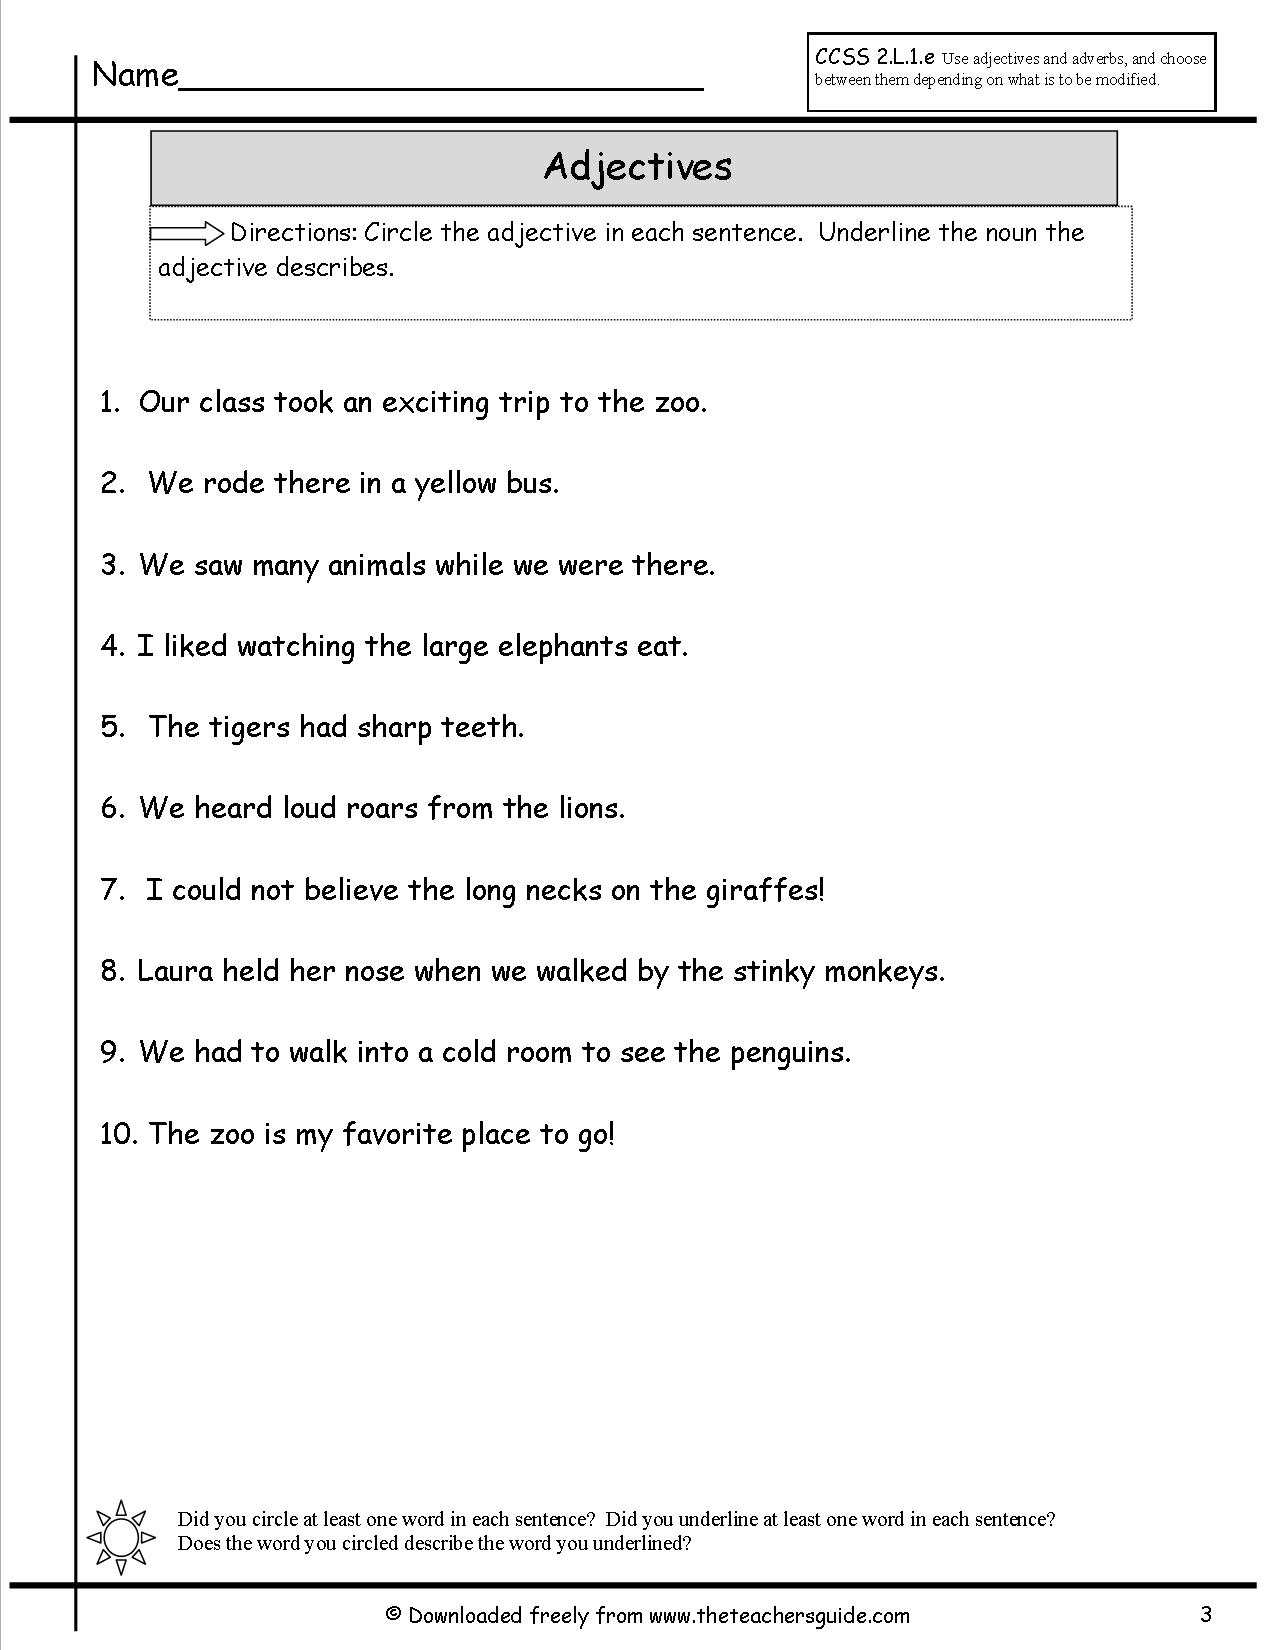 16-best-images-of-printable-adjective-worksheets-4th-grade-adjective-worksheets-4th-grade